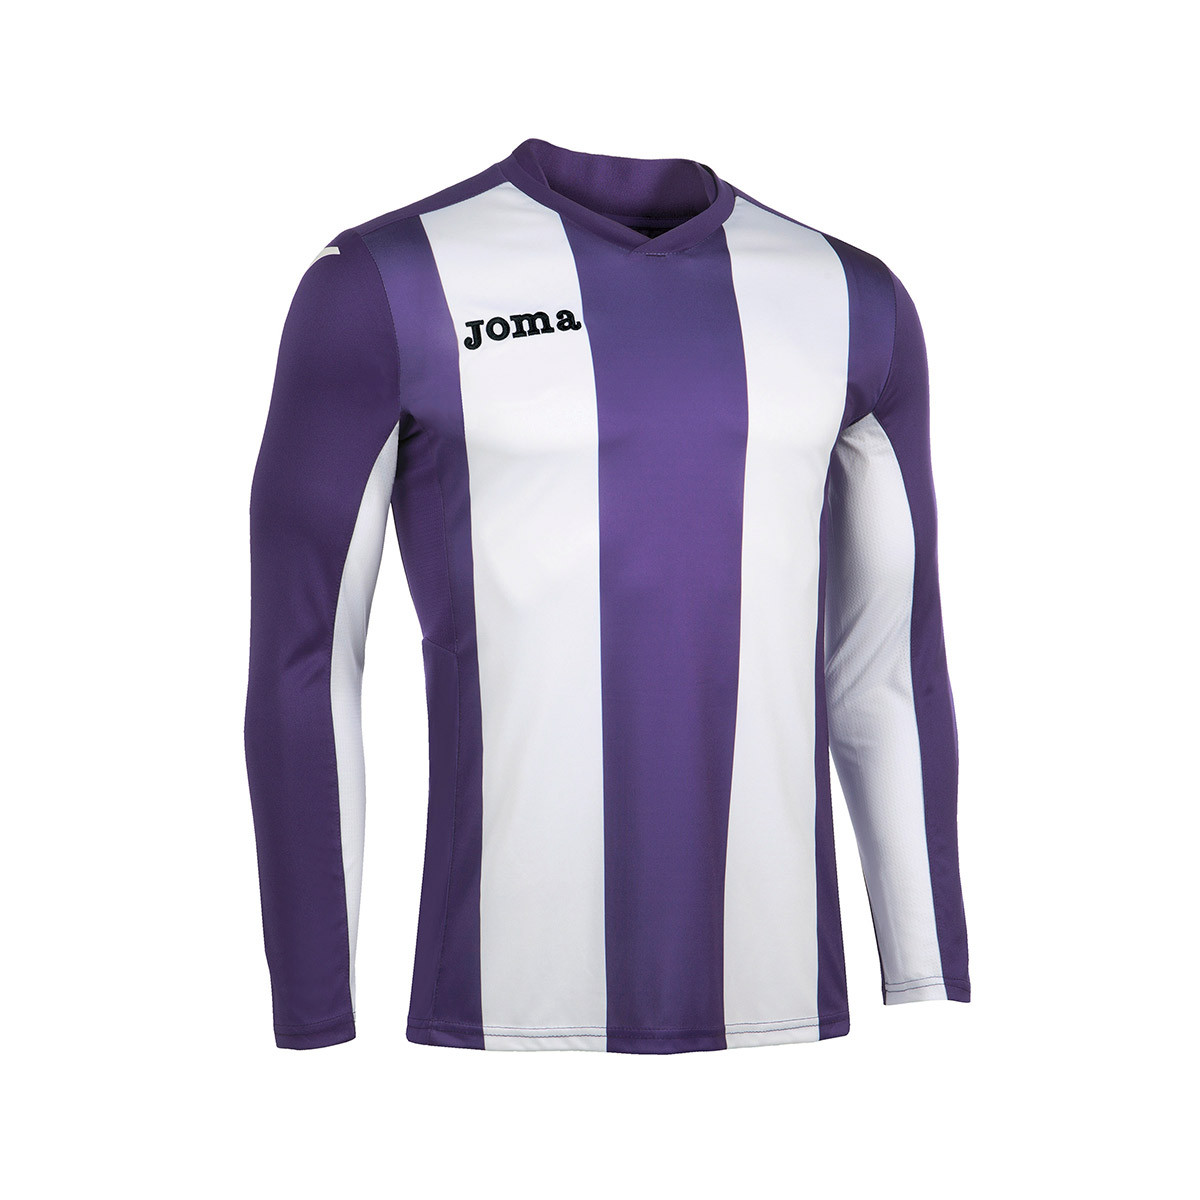 purple and white football jersey